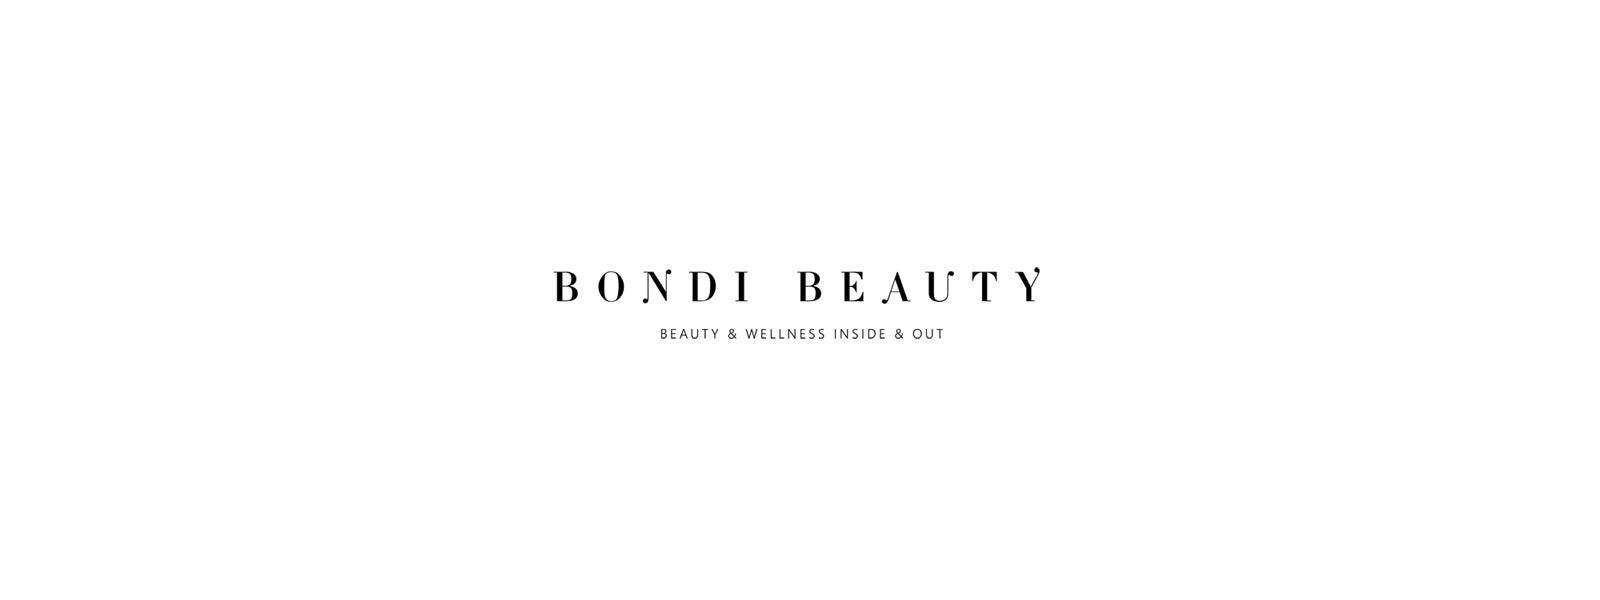 Bondi Beauty — 9 Daily Rituals For Better Energy and Health